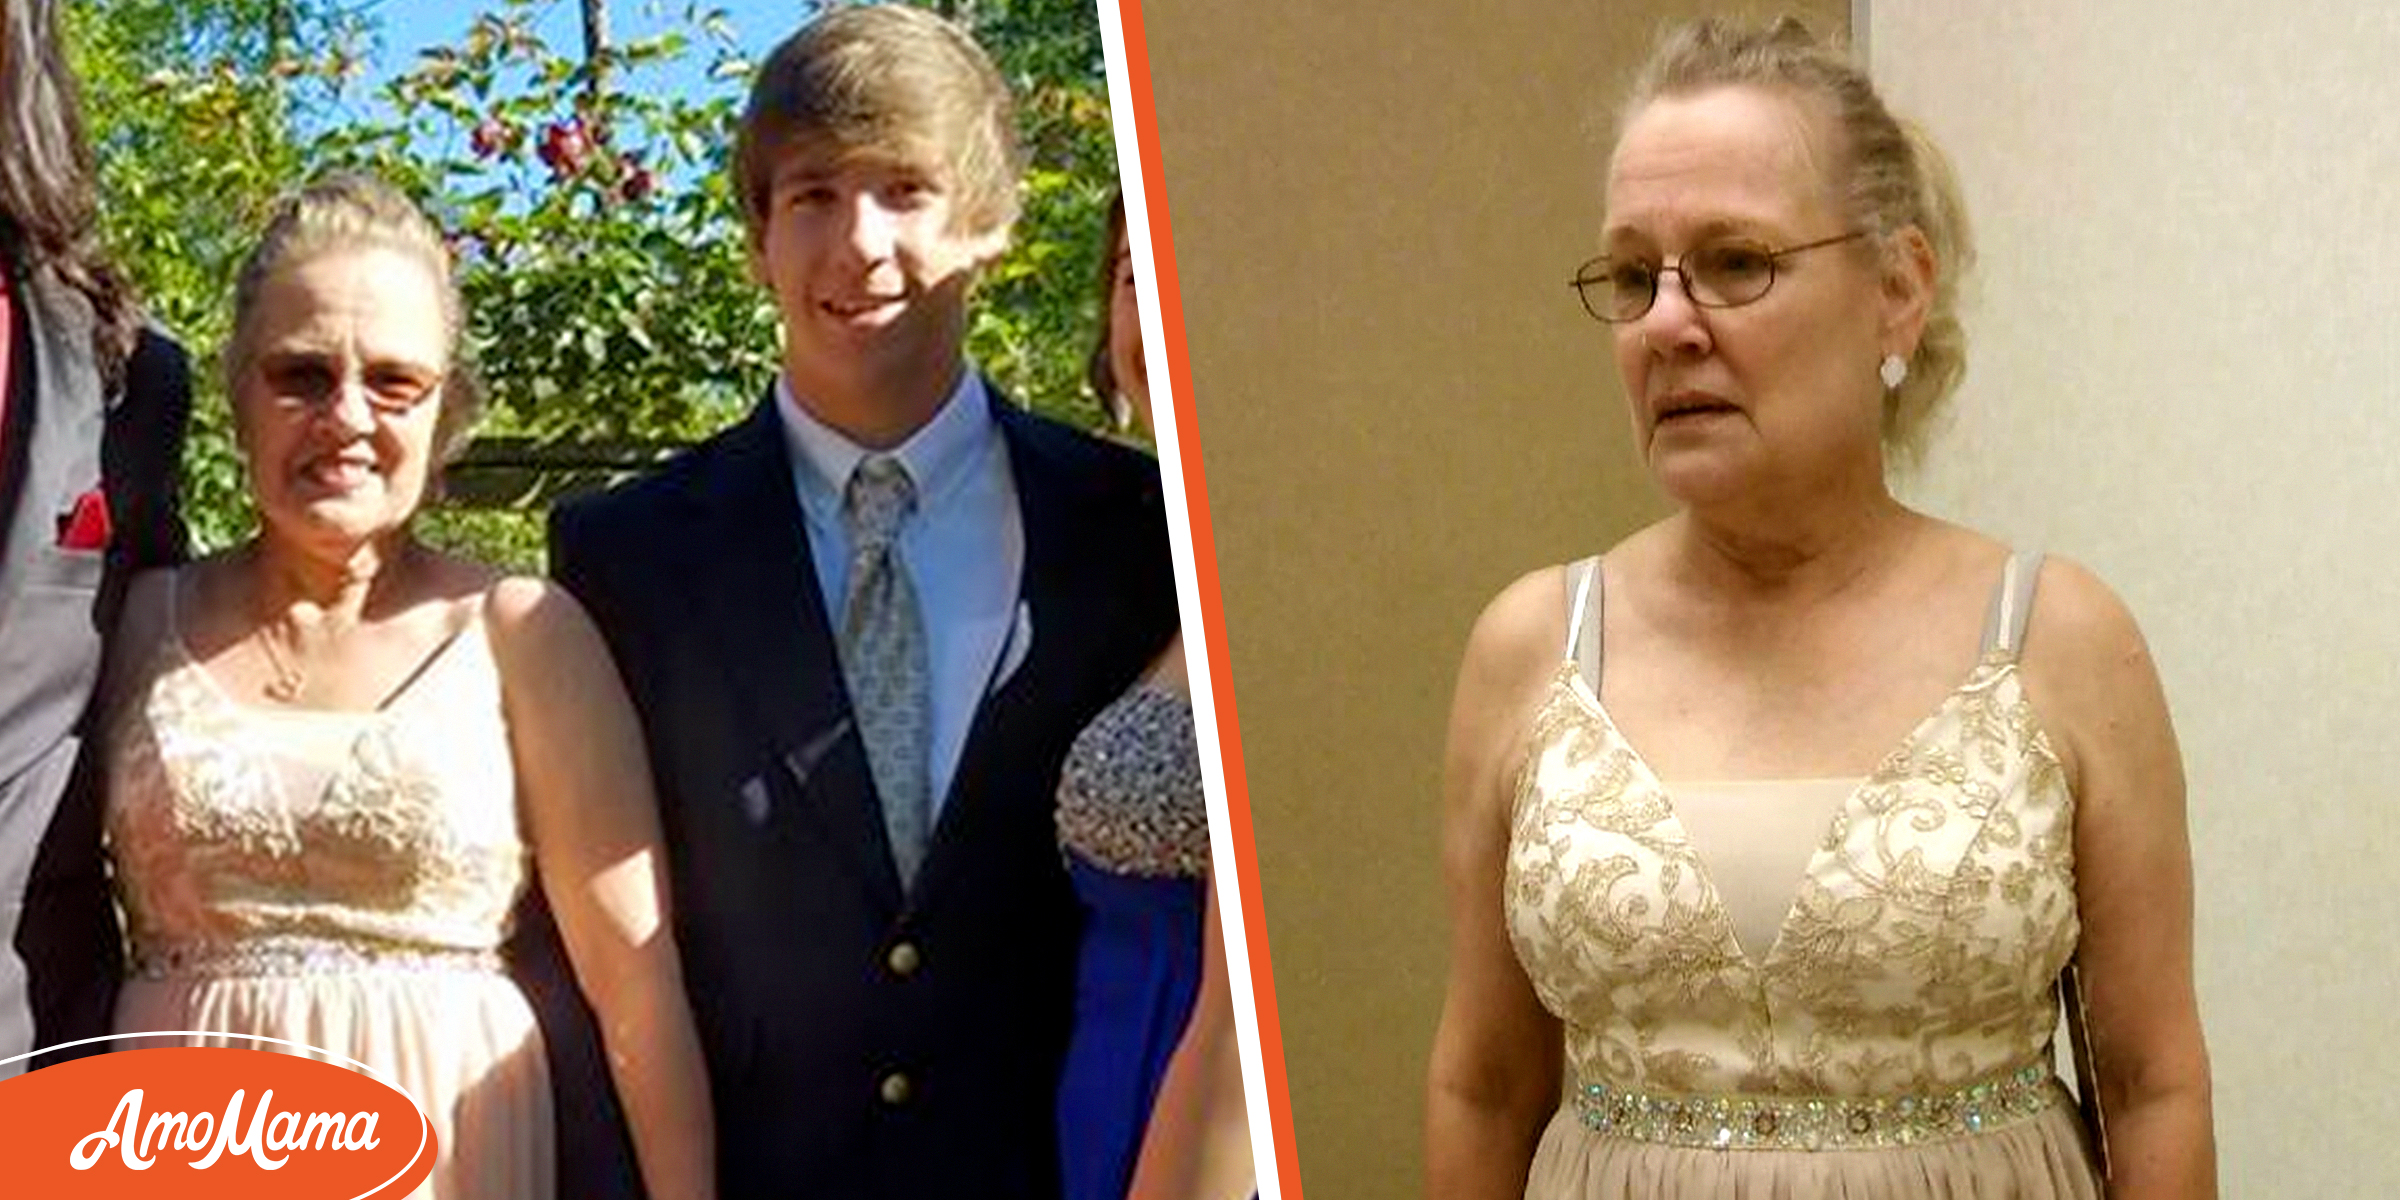 Boy Invites Granny Who Never Went to Prom as Date to His, Is ‘Heartbroken’ When School Forbids It